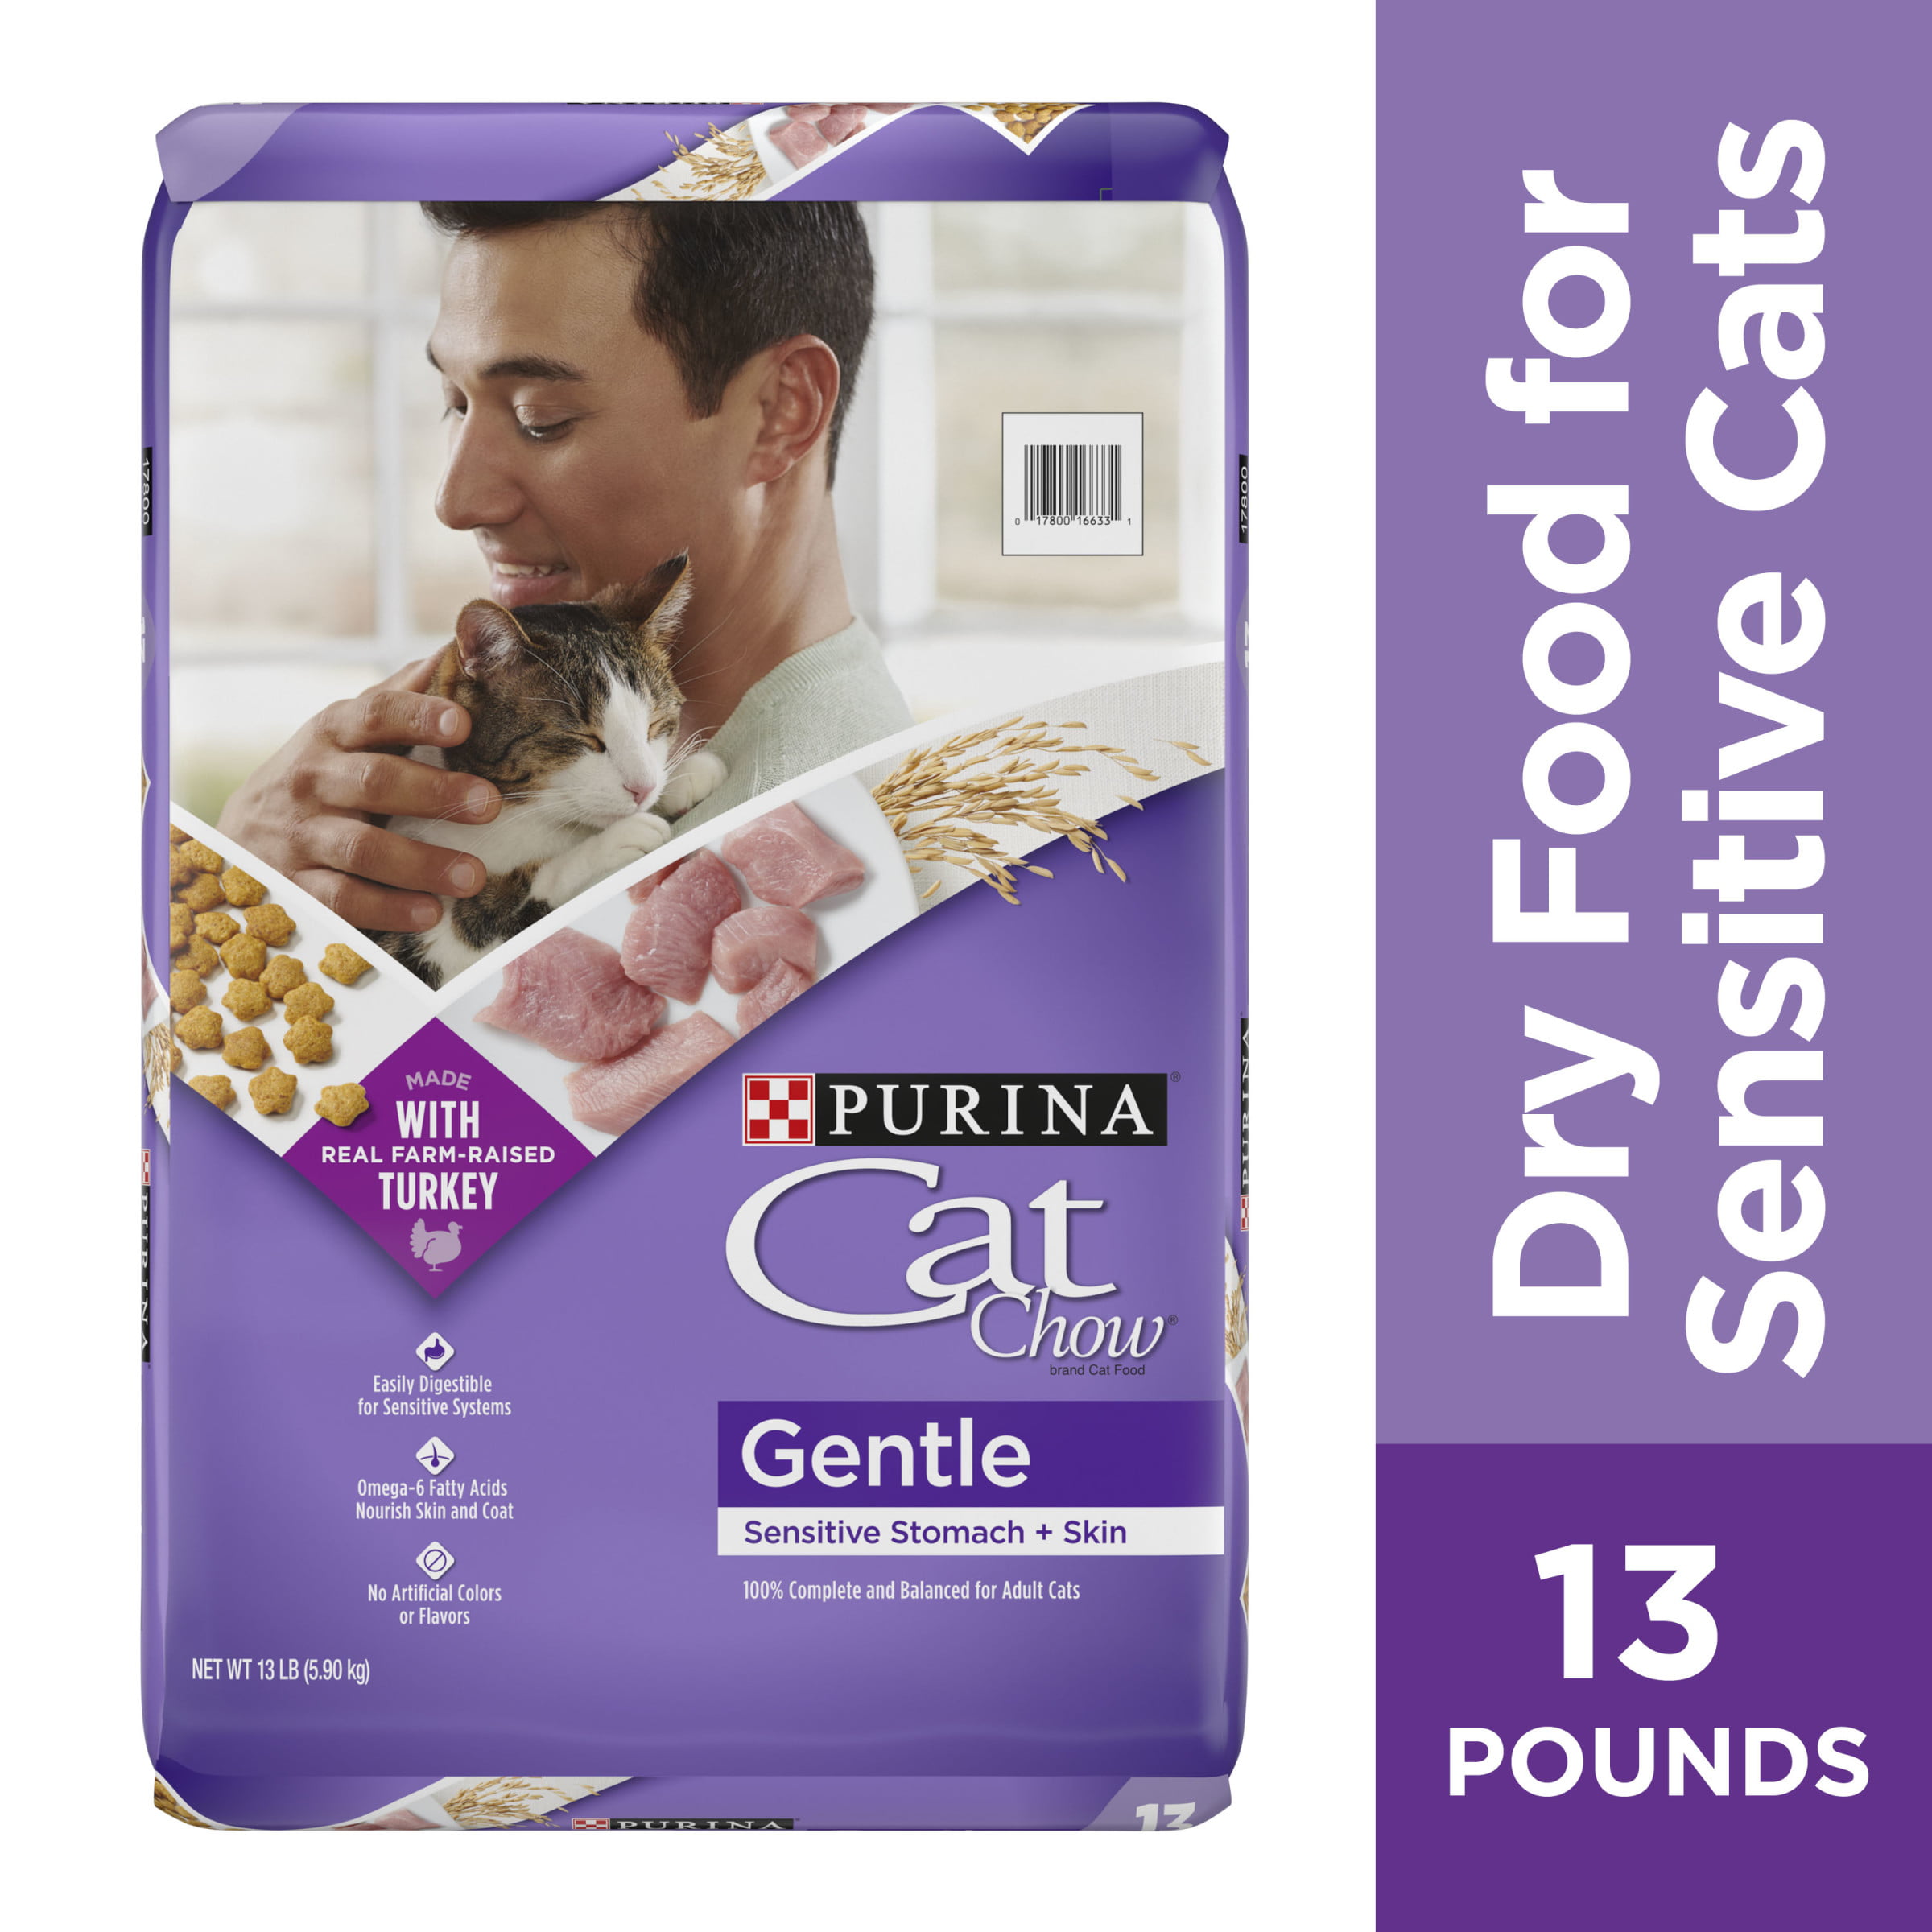 Purina Cat Chow Gentle Dry Cat Food, Sensitive Stomach + Skin, 13 lb